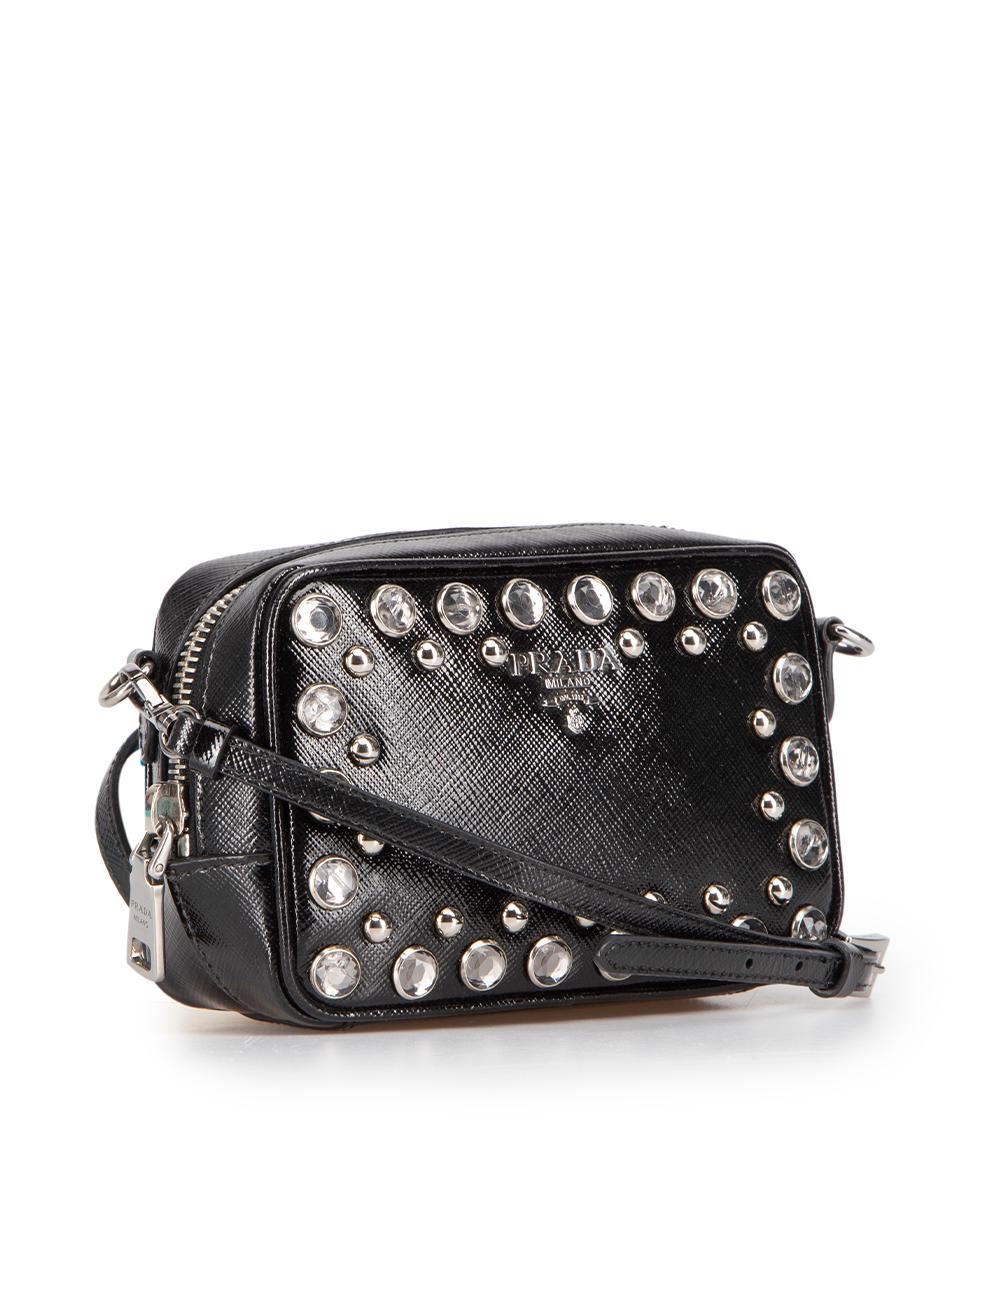 CONDITION is Good. Minor wear to bag is evident. Light wear to embellishment only where a number of crystal studs have cracked but are still intact on this used Prada designer resale item.
  
  Details
  Black
  Patent scotchgrain saffiano leather
 